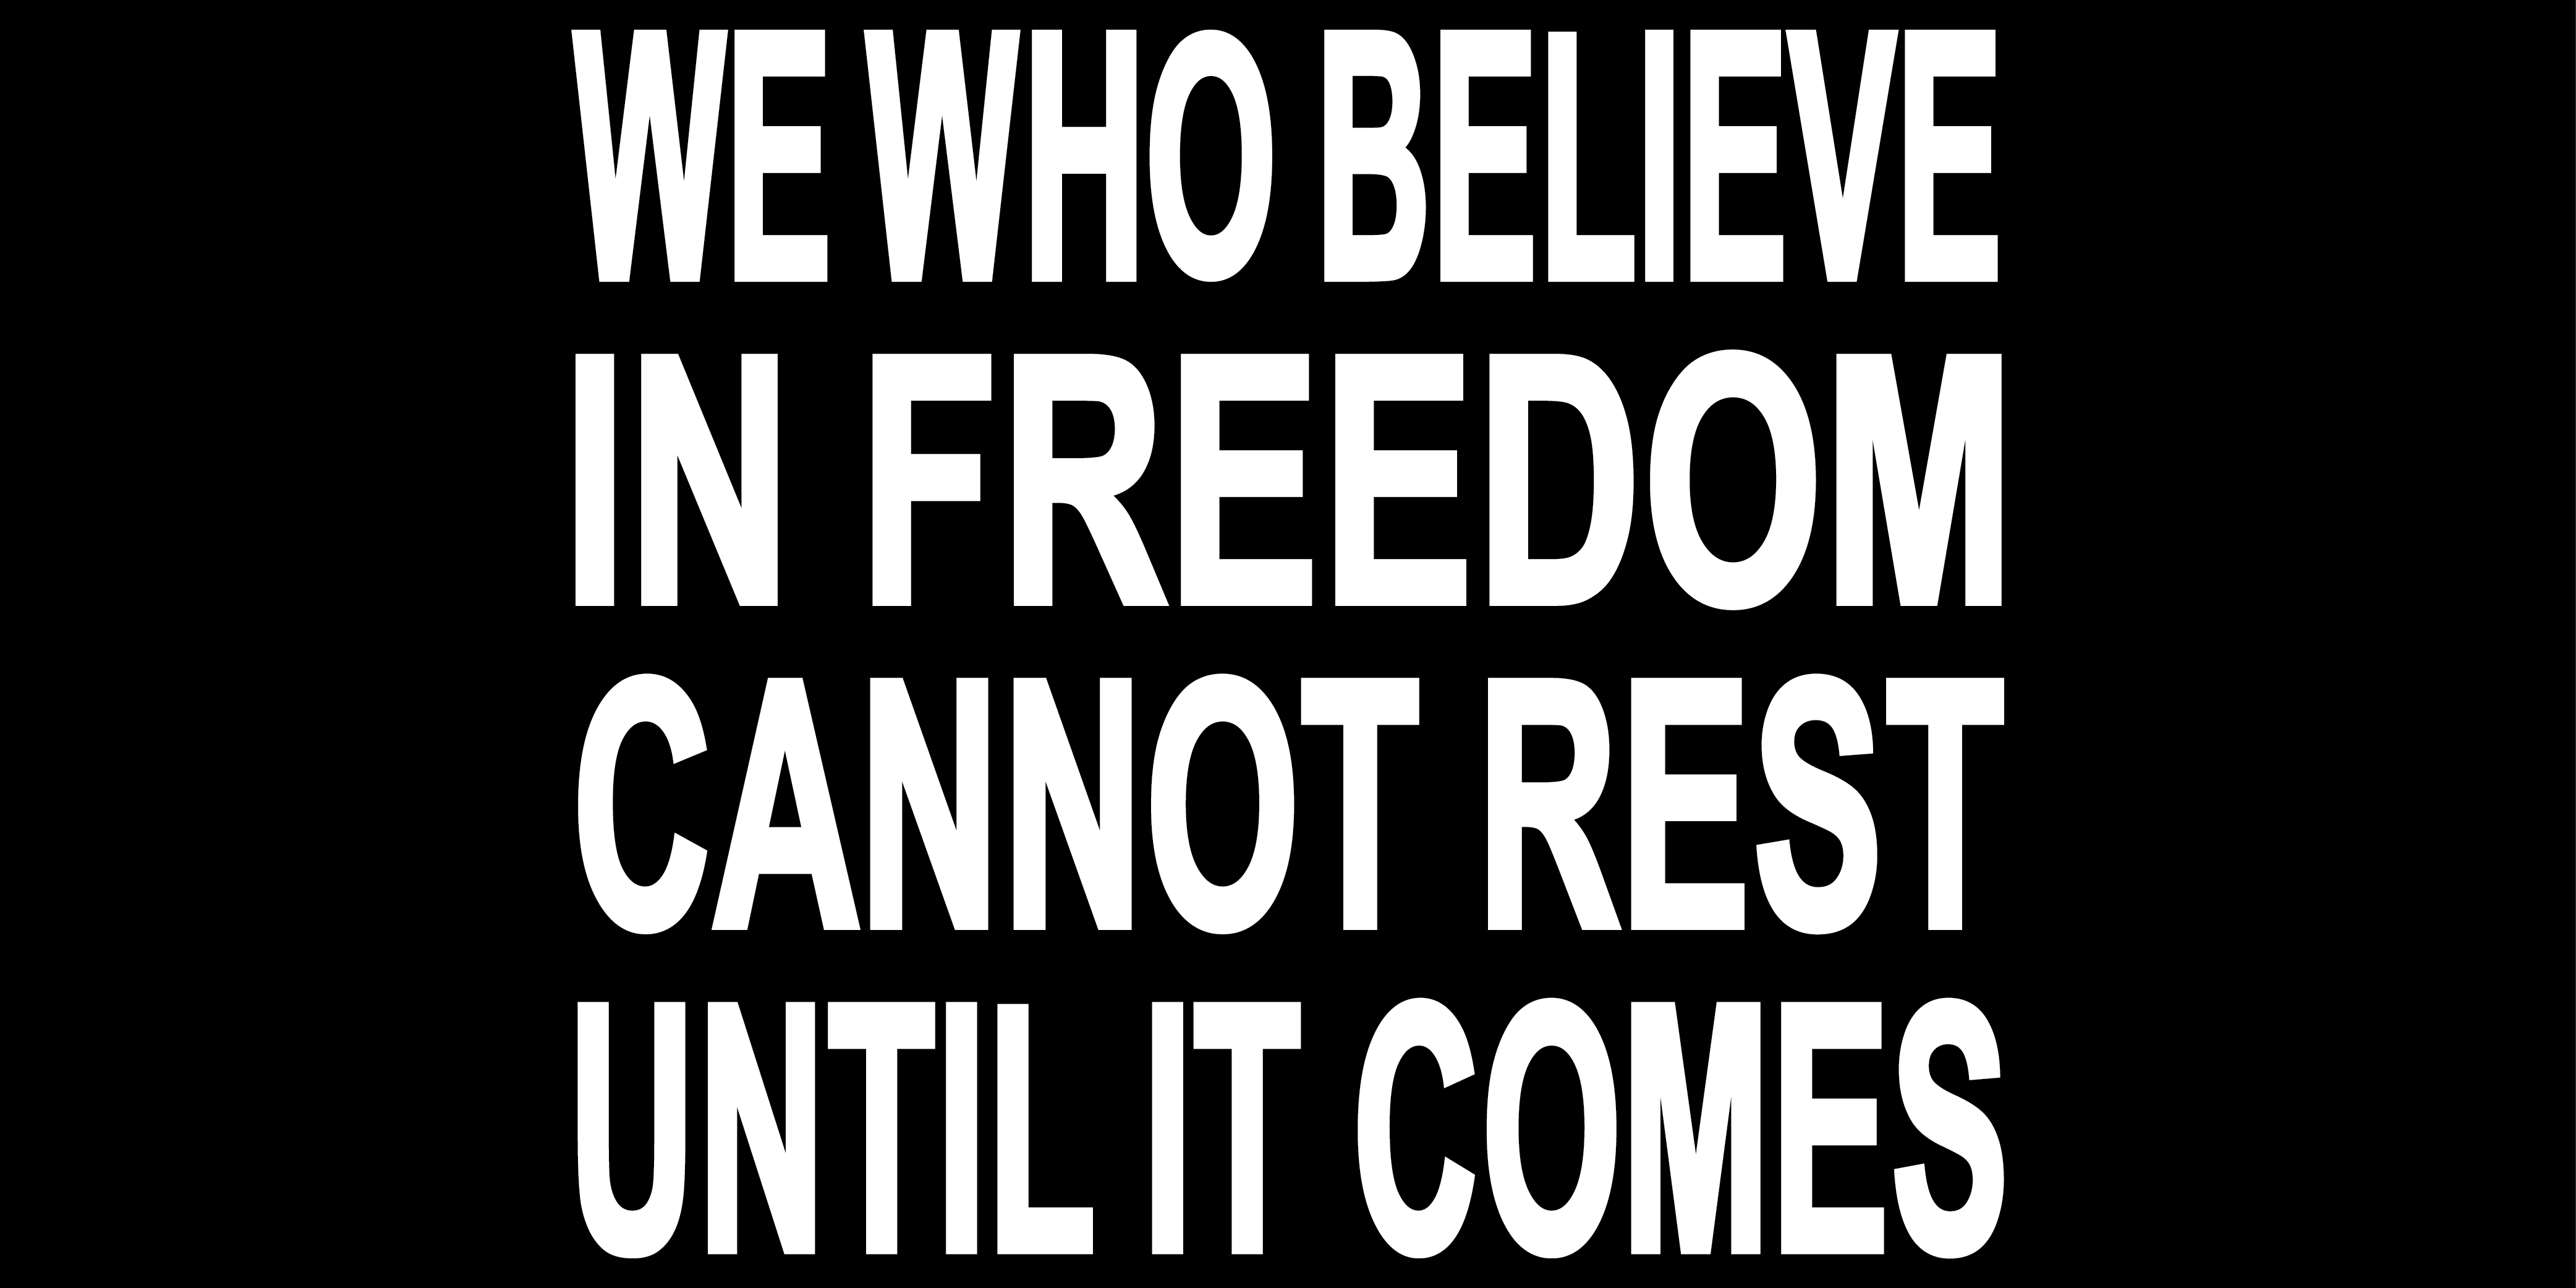 WE WHO BELIEVE IN FREEDOM <br>CANNOT REST UNTIL IT COMES